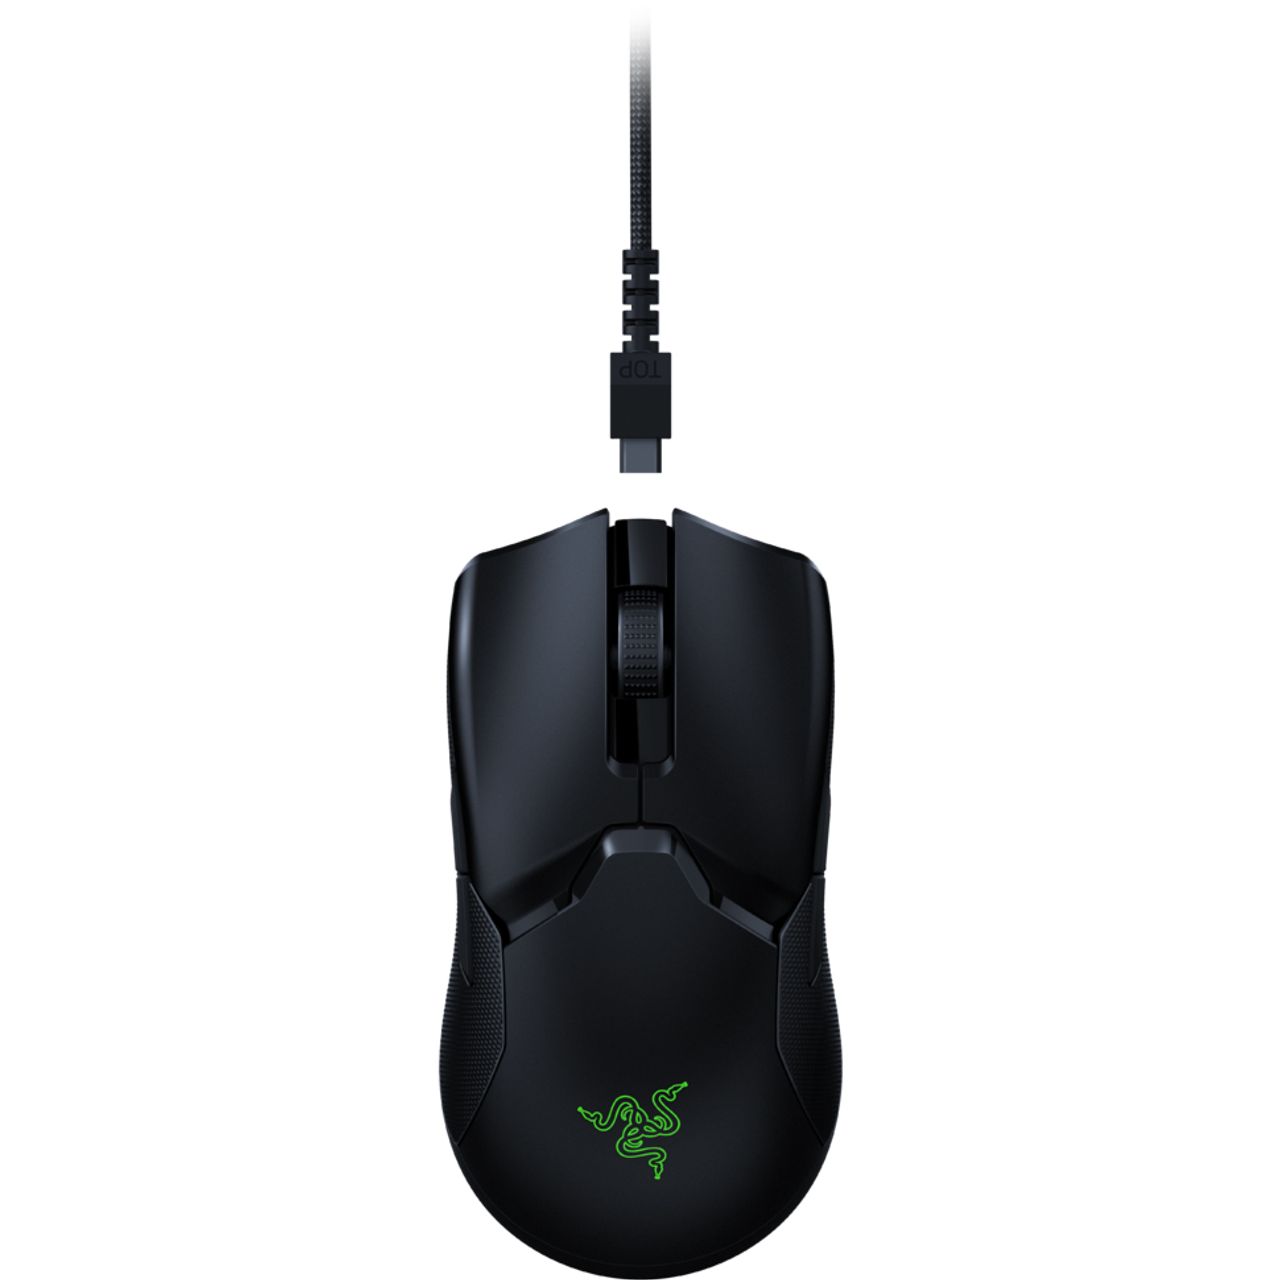 Razer Viper Ultimate Wireless USB Optical Mouse Review